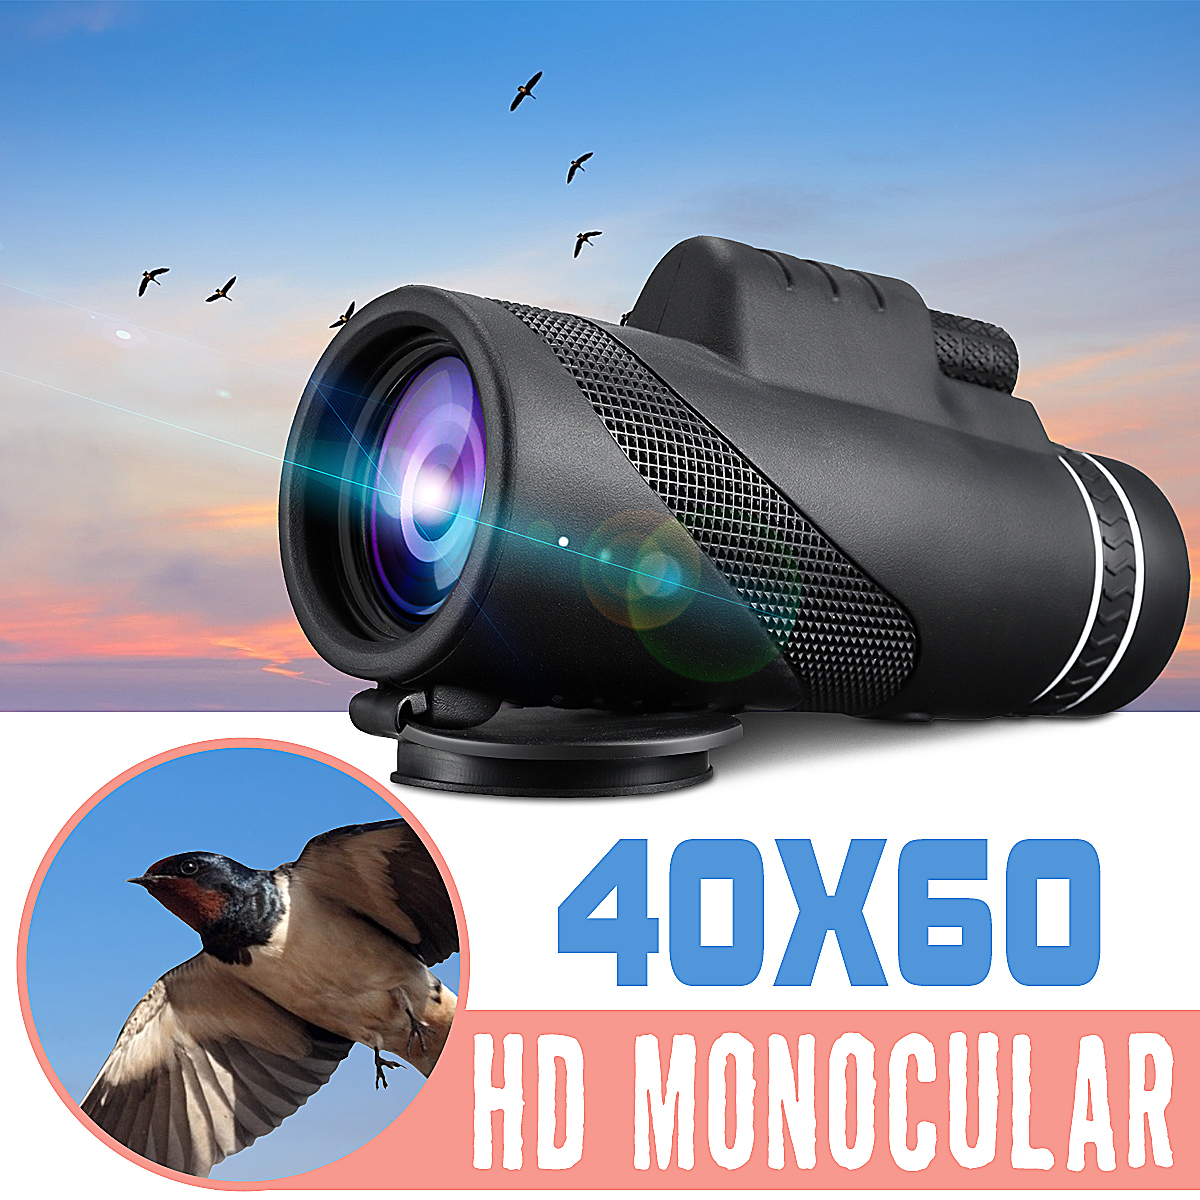 DWP Monocular Telescope with Free 3in1 Smartphone Lens Phone Clip Carrying case 12x50 Monocular Scope for Smartphone Tripod Compact Magnifying Lenses Monoscope Microfiber Cloth